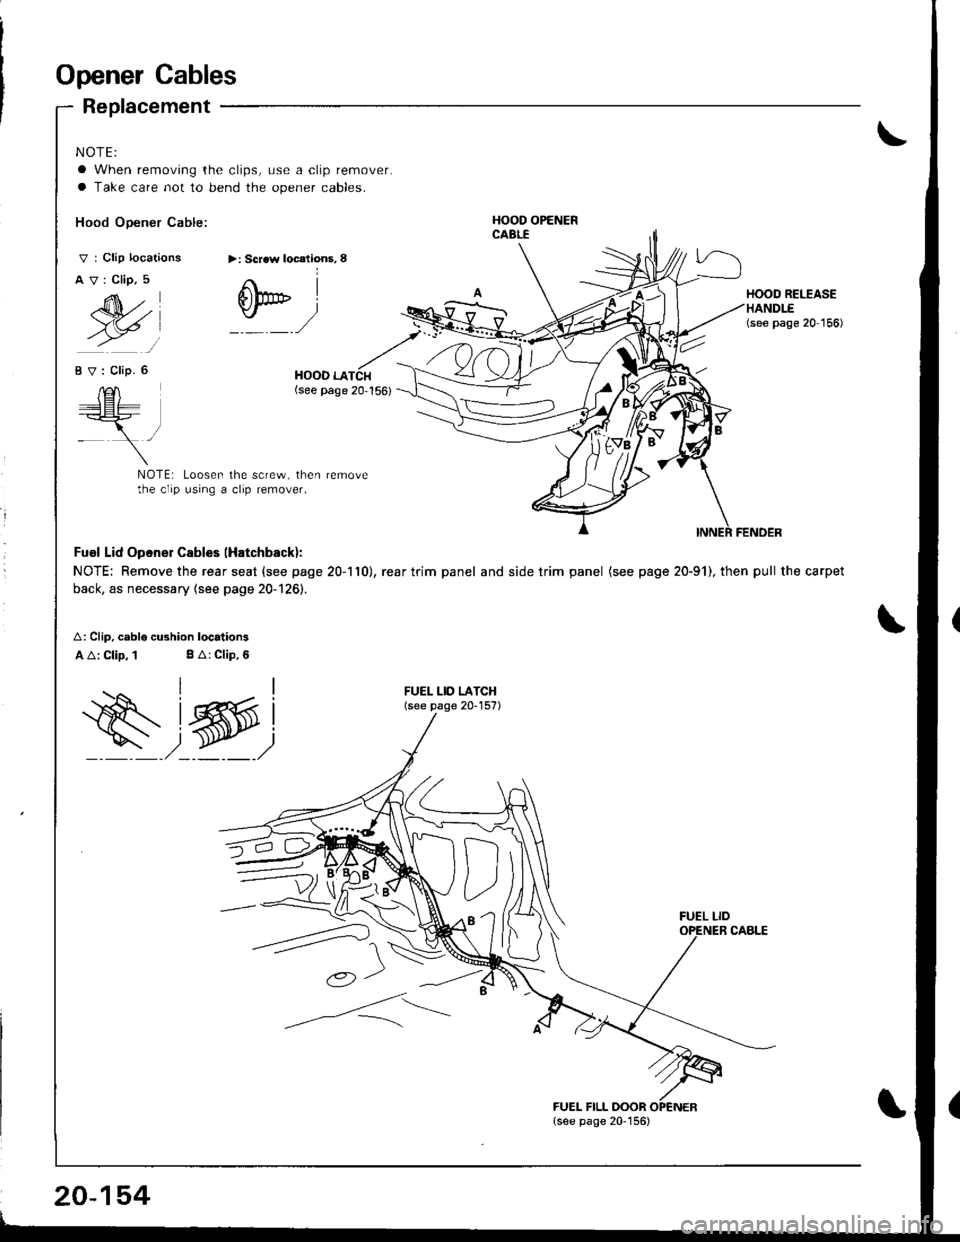 HONDA INTEGRA 1998 4.G User Guide Opener Cables
Replacement
NOTE:\
a When removing the clips, use a clip remover.
a Take care not to bend the opener cables.
Hood Opener Cable:
V : Clip locations
AV:Clip,5
>: Scraw localions, 8
M)
6h* 